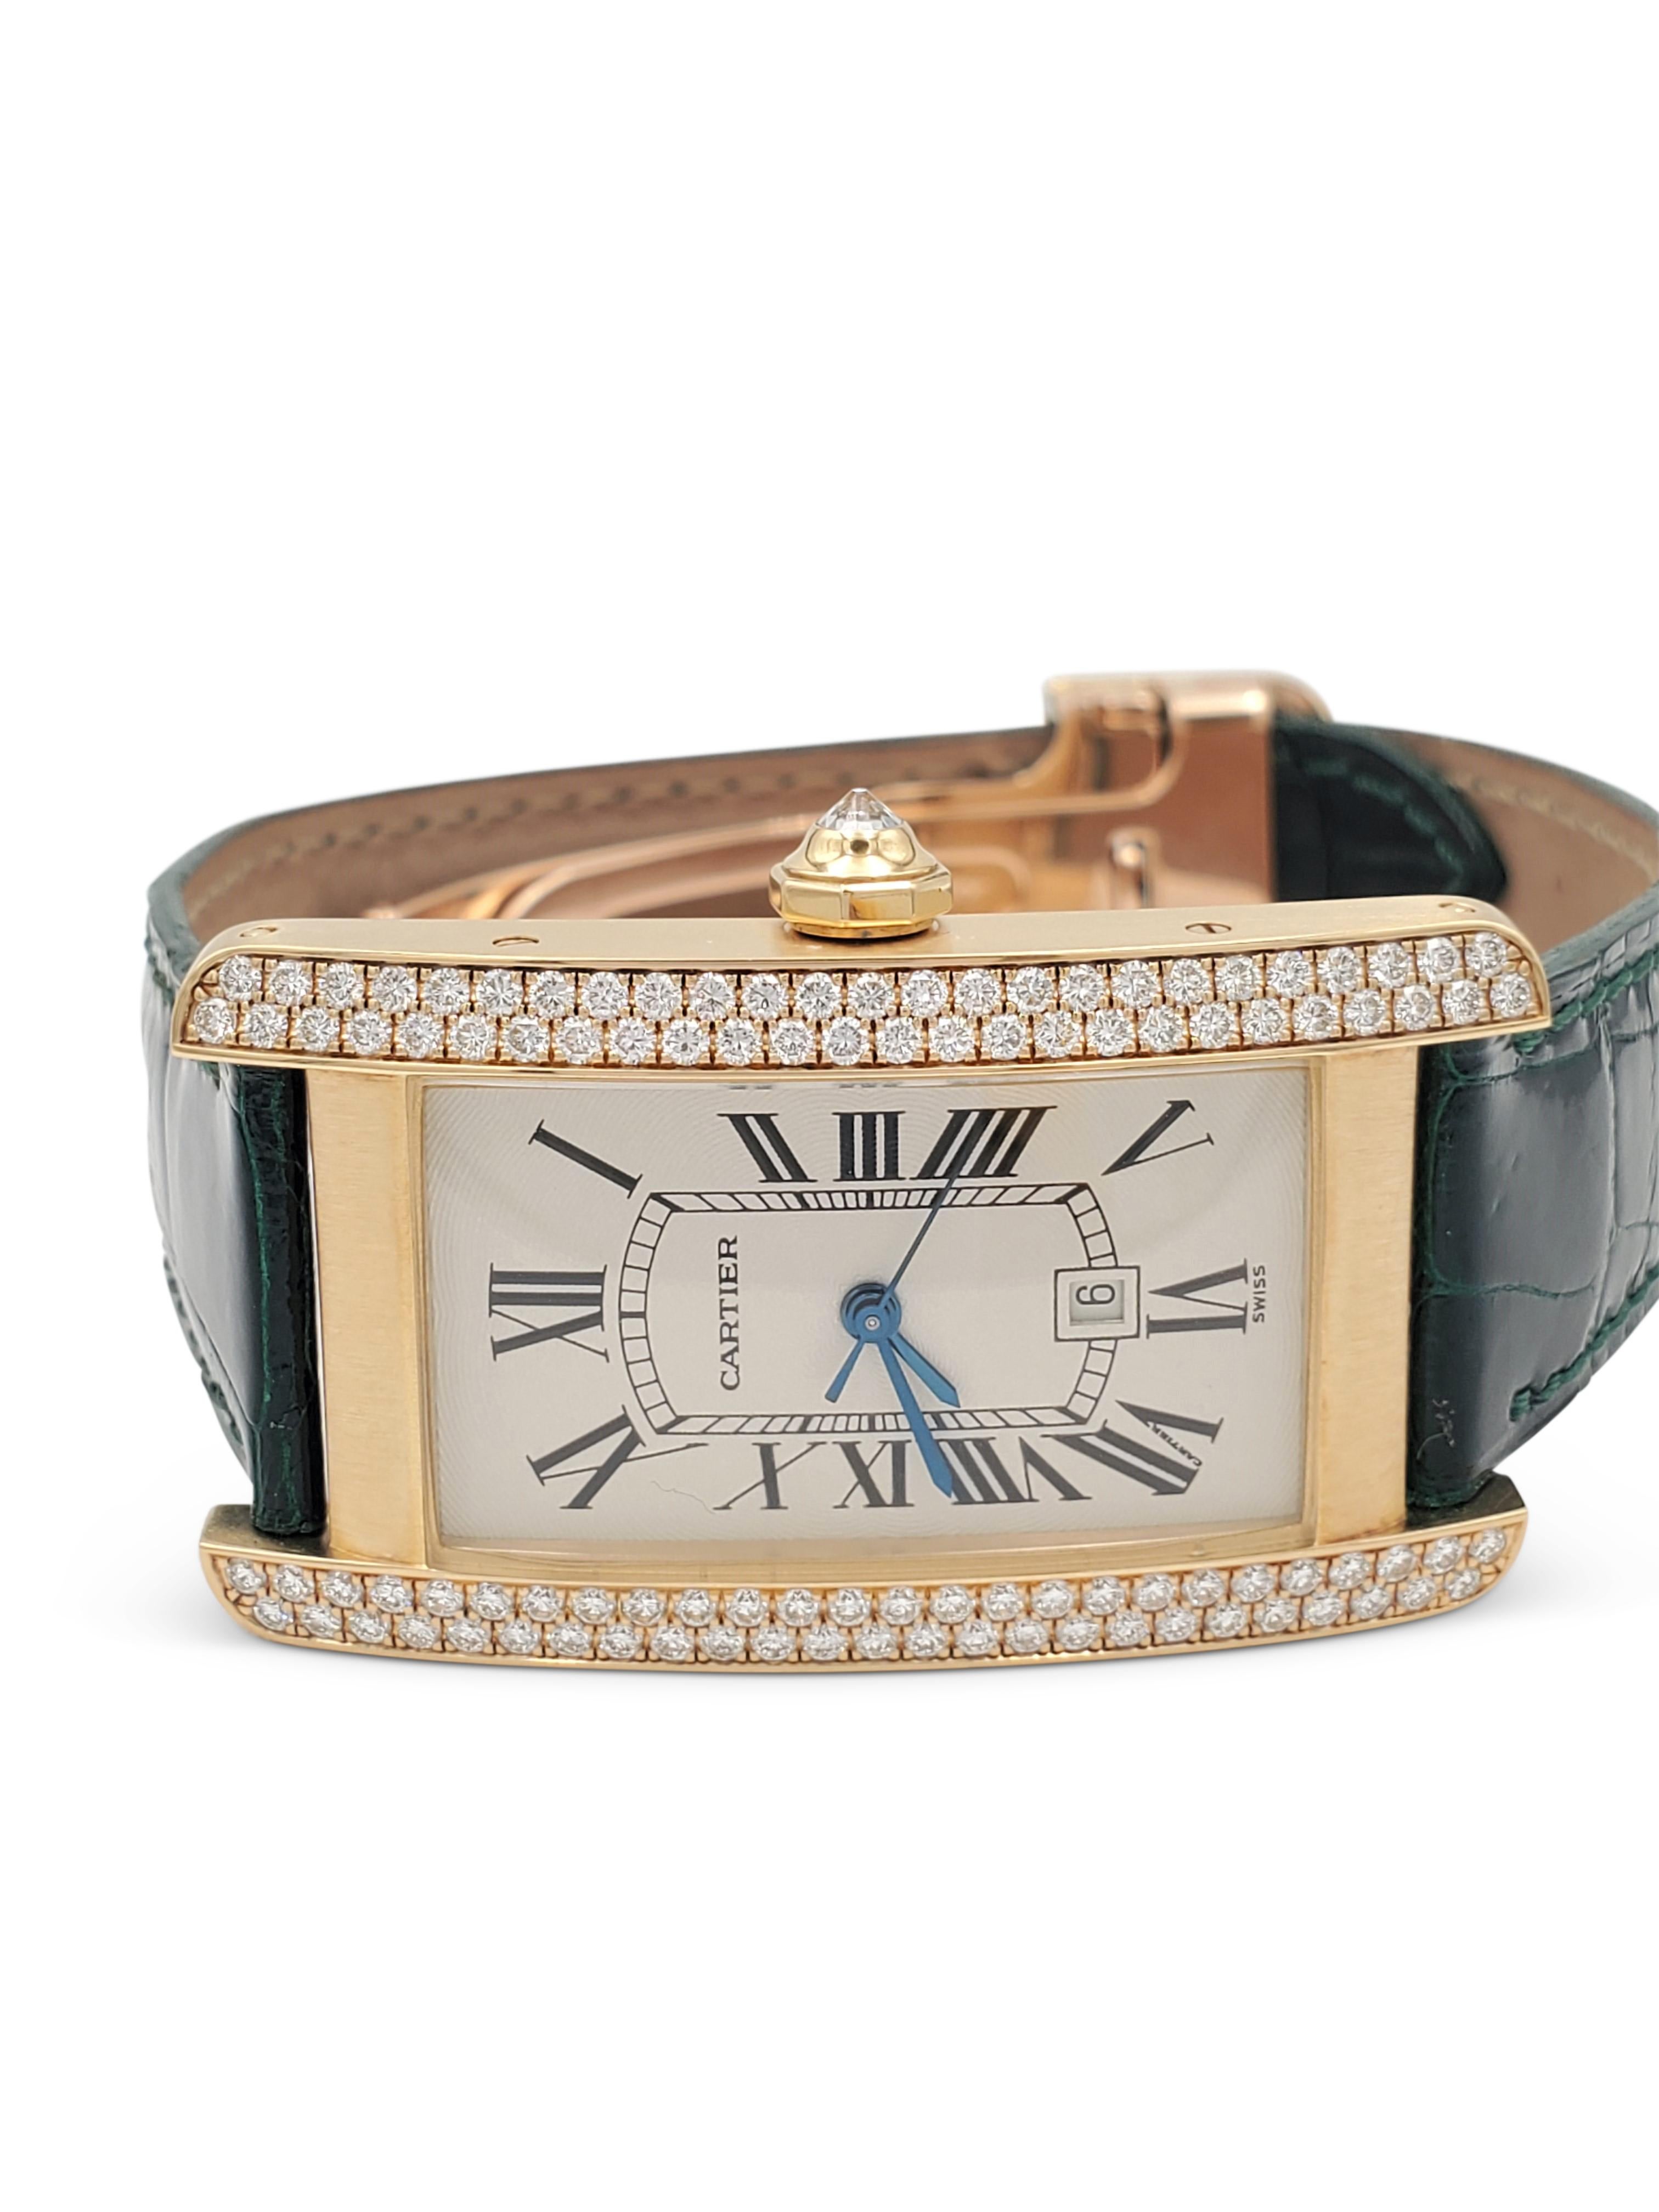 Cartier Tank Américaine Yellow Gold and Diamond Leather Strap Ladies Watch 1